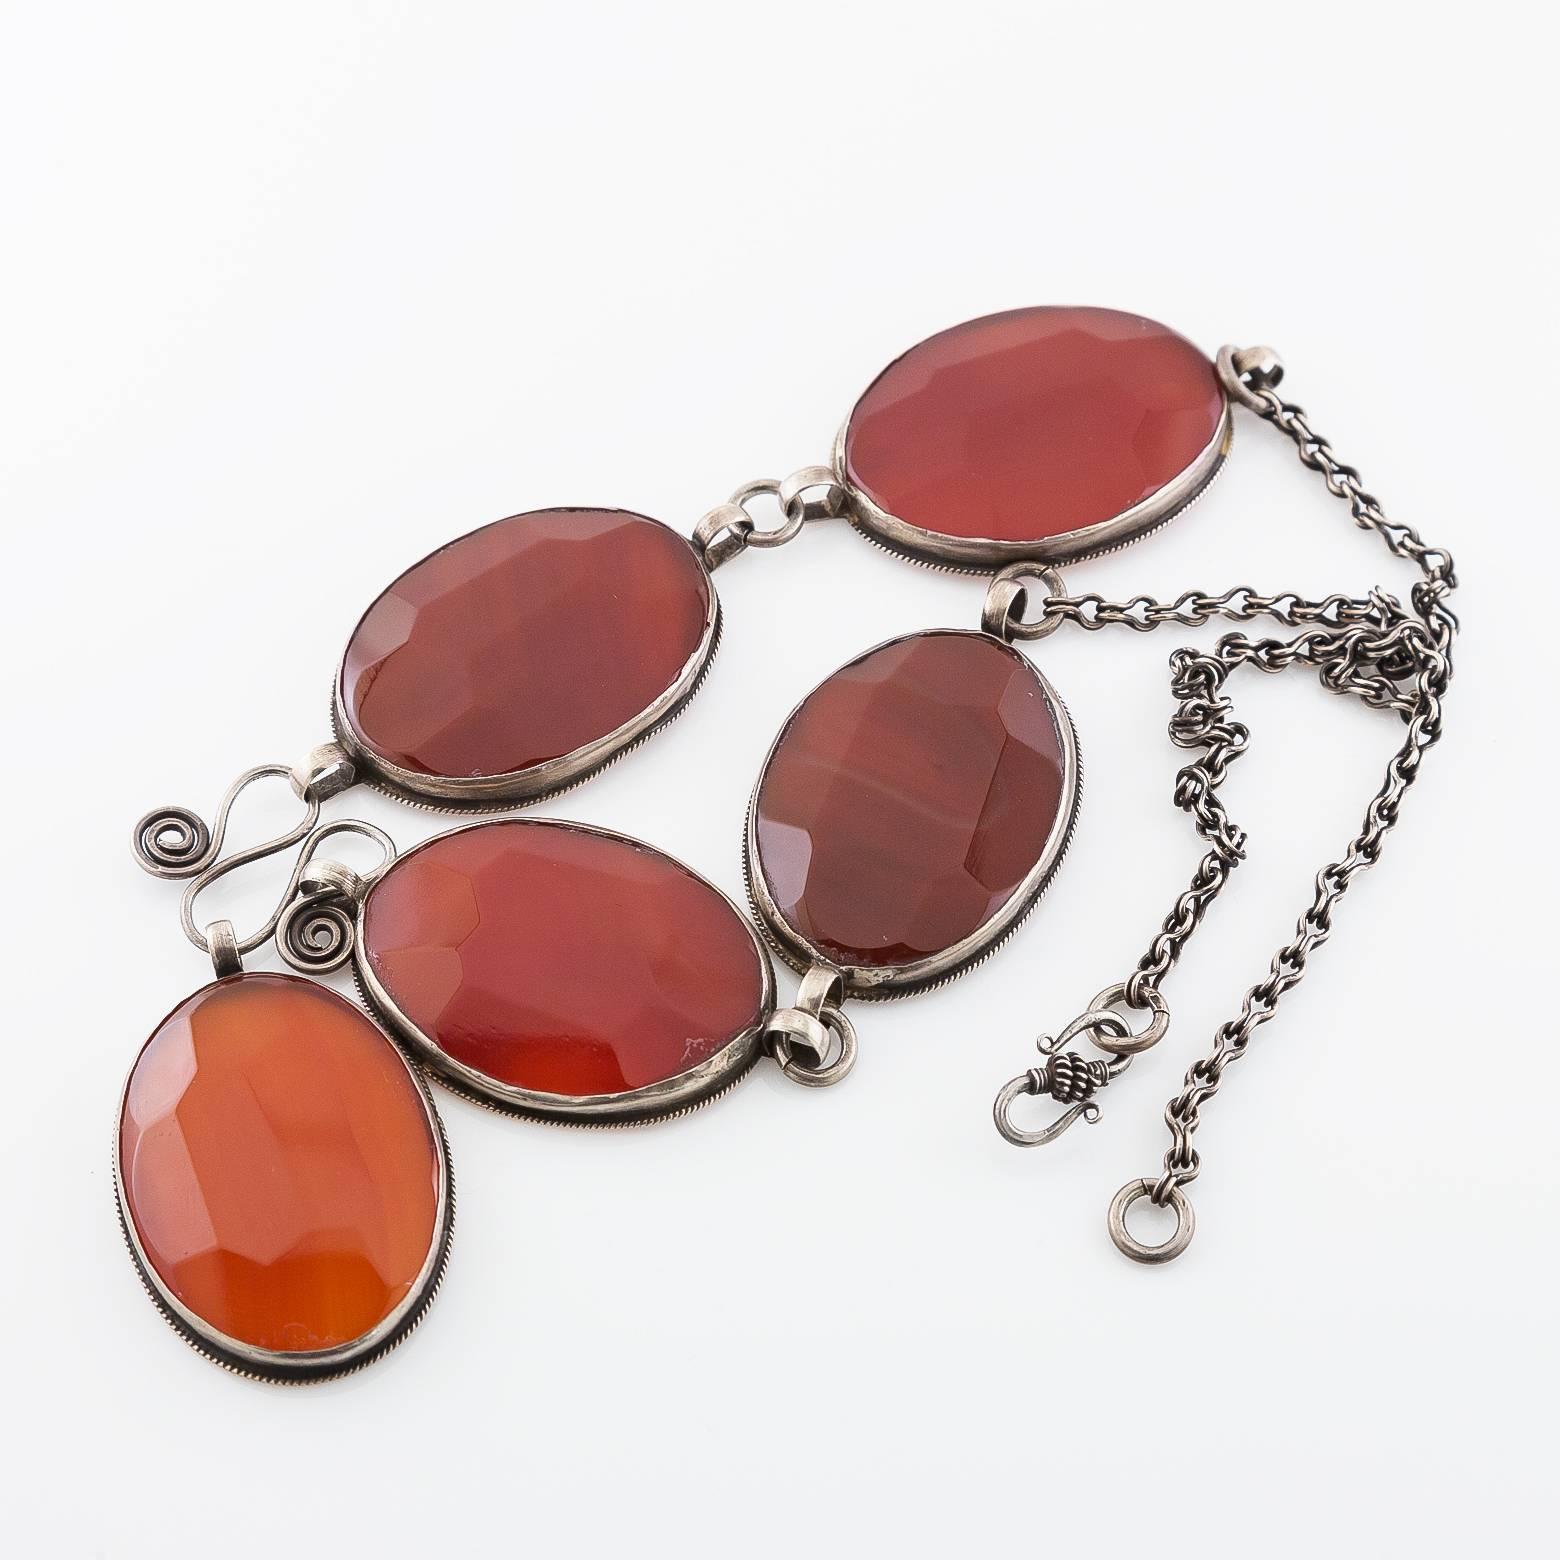 Women's Creamy Varying Shades Carnelian Sterling Silver Necklace